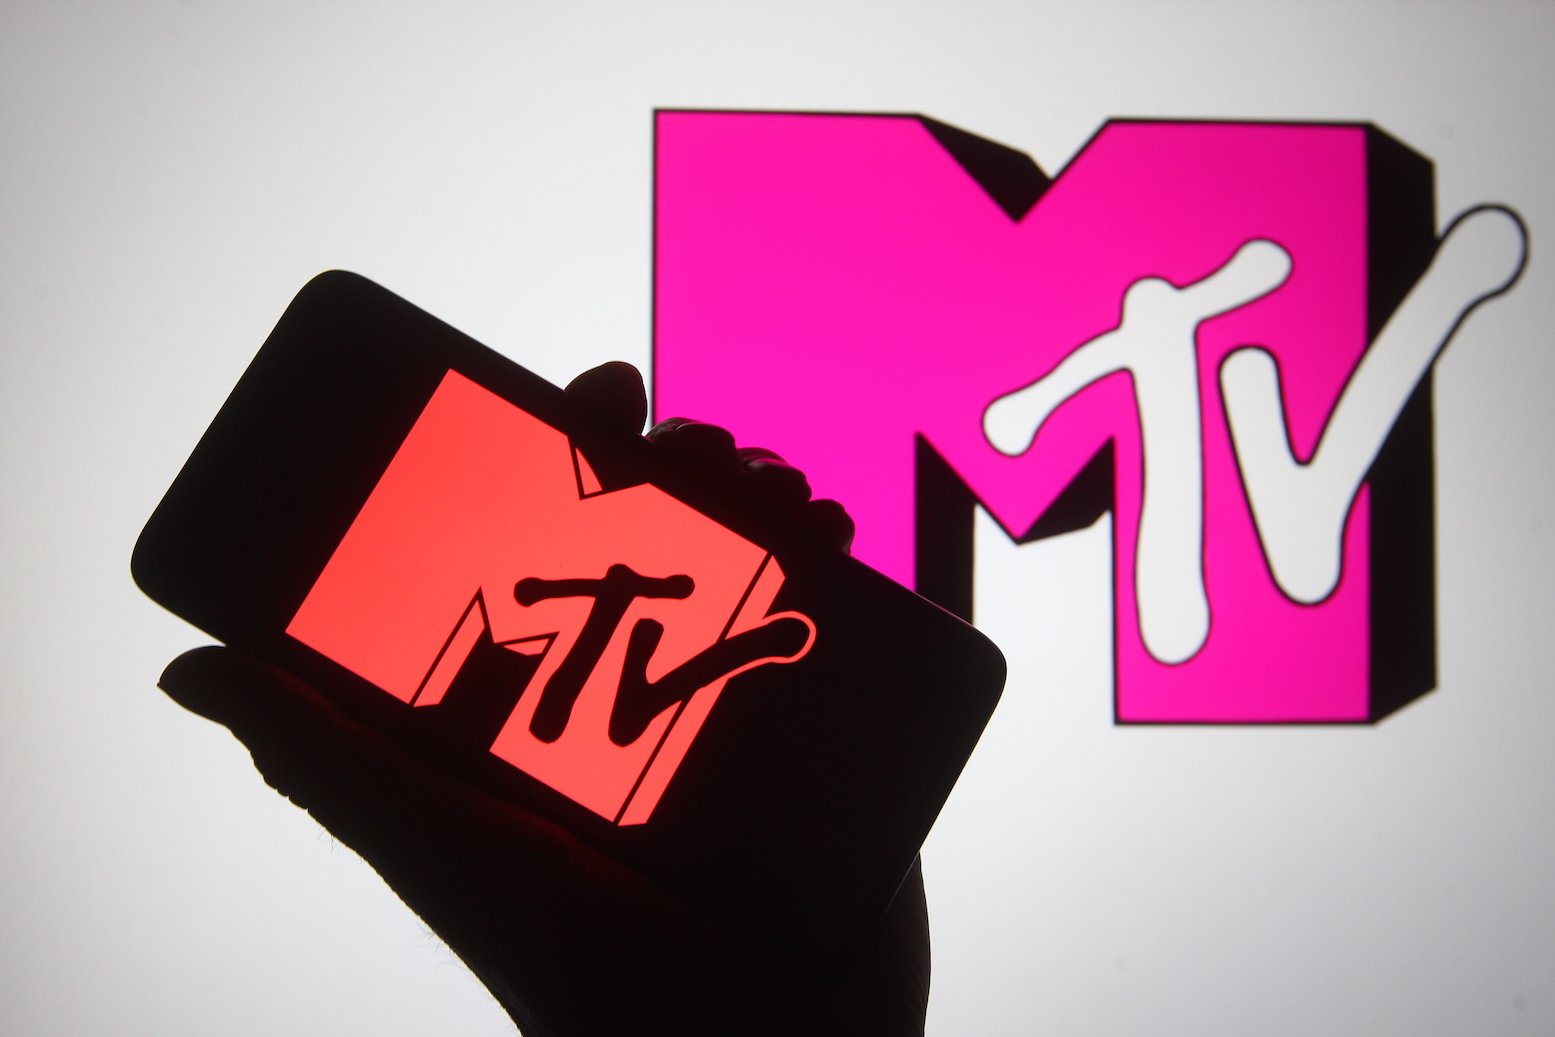 An illustration of a silhouette of a hand holding an MTV symbol. Chris Pearson's death rocked the MTV community in October 2021, and his ex, Haley Read, posted about it to Instagram